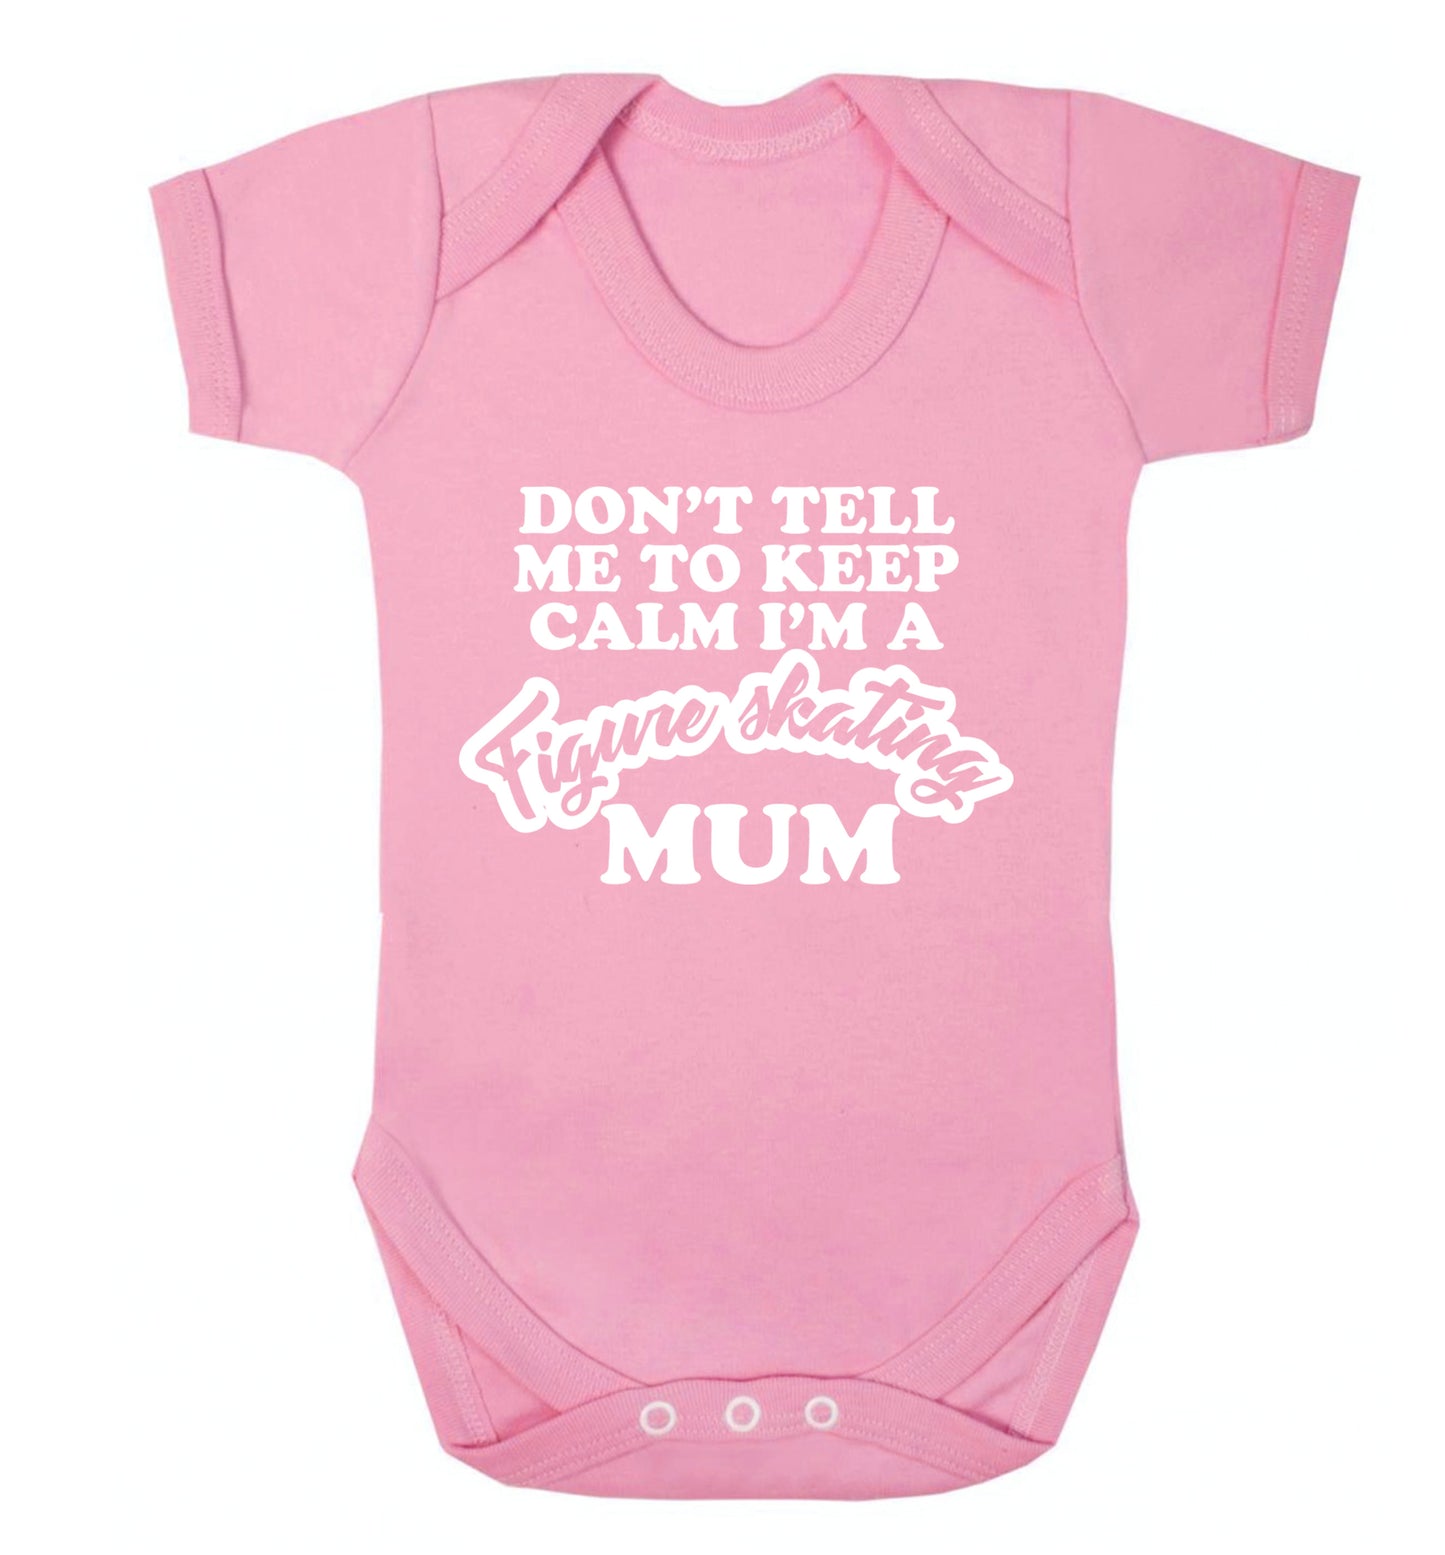 Don't tell me to keep calm I'm a figure skating mum Baby Vest pale pink 18-24 months